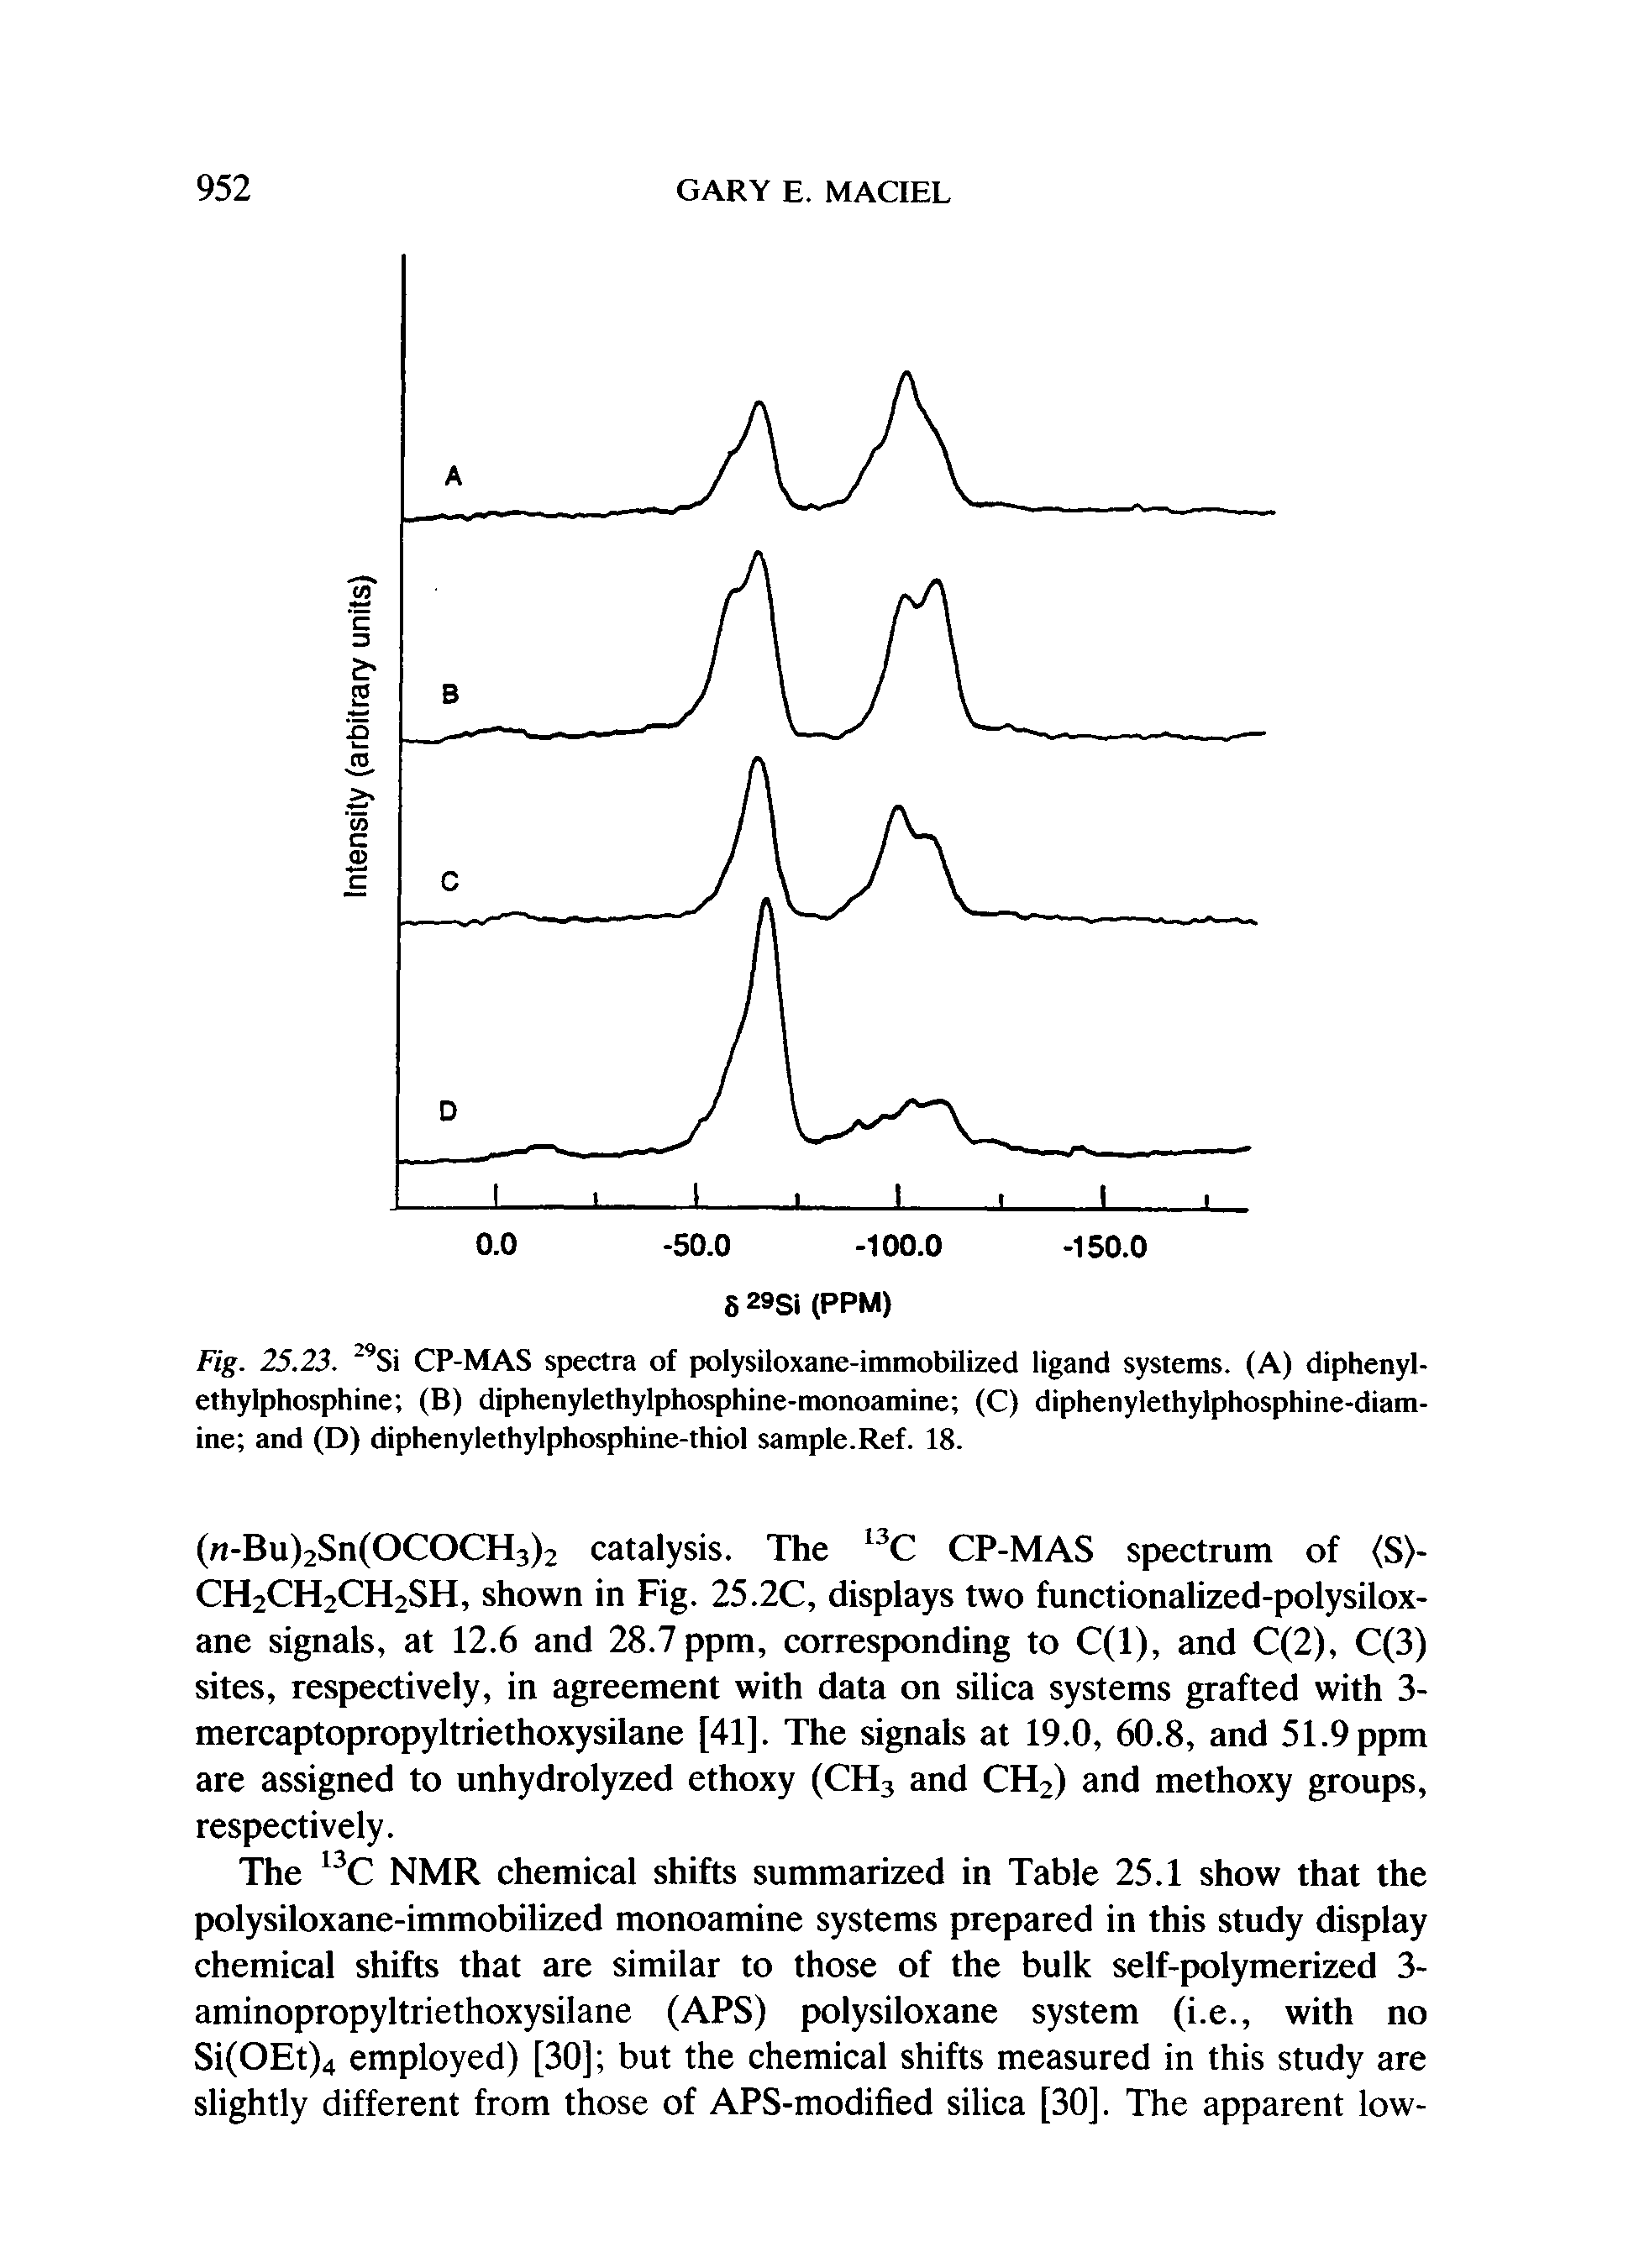 Fig. 25.23. CP-MAS spectra of polysiloxane-immobilized ligand systems. (A) diphenyl-ethylphosphine (B) diphenylethylphosphine-monoamine (C) diphenylethylphosphine-diam-ine and (D) diphenylethylphosphine-thiol sample.Ref. 18.